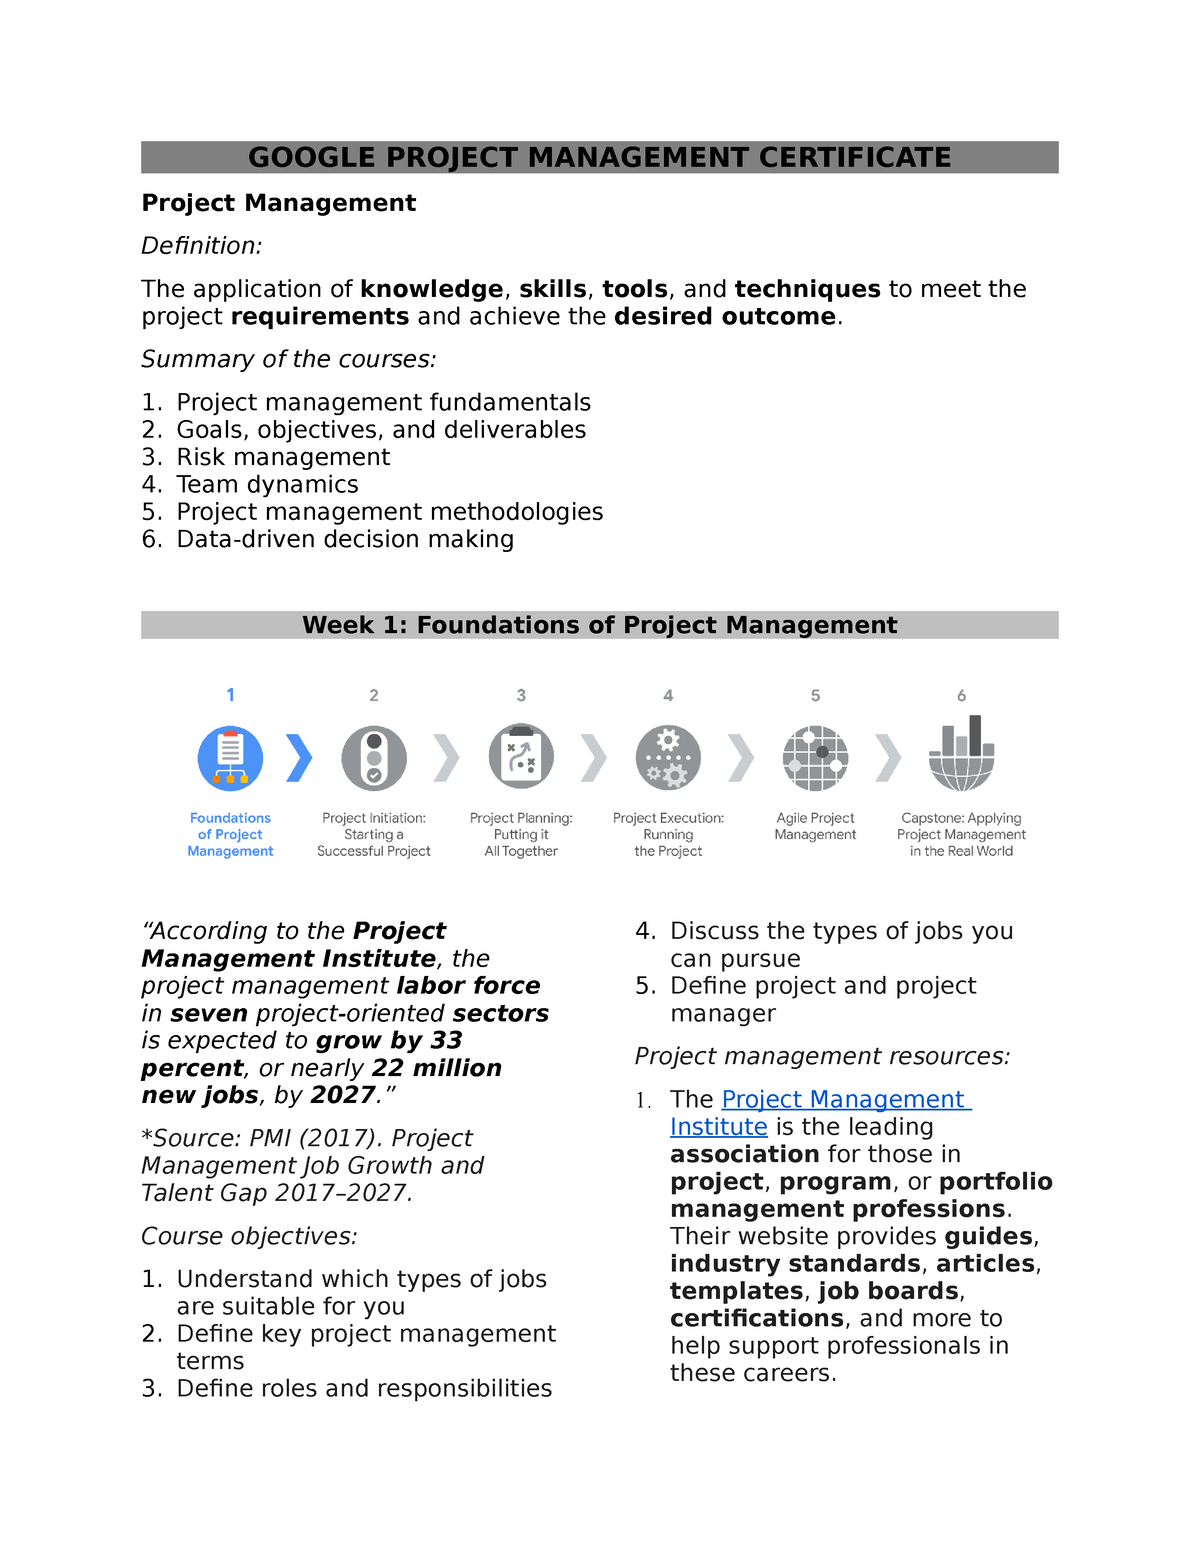 Google Project Management Certificate Notes GOOGLE PROJECT MANAGEMENT